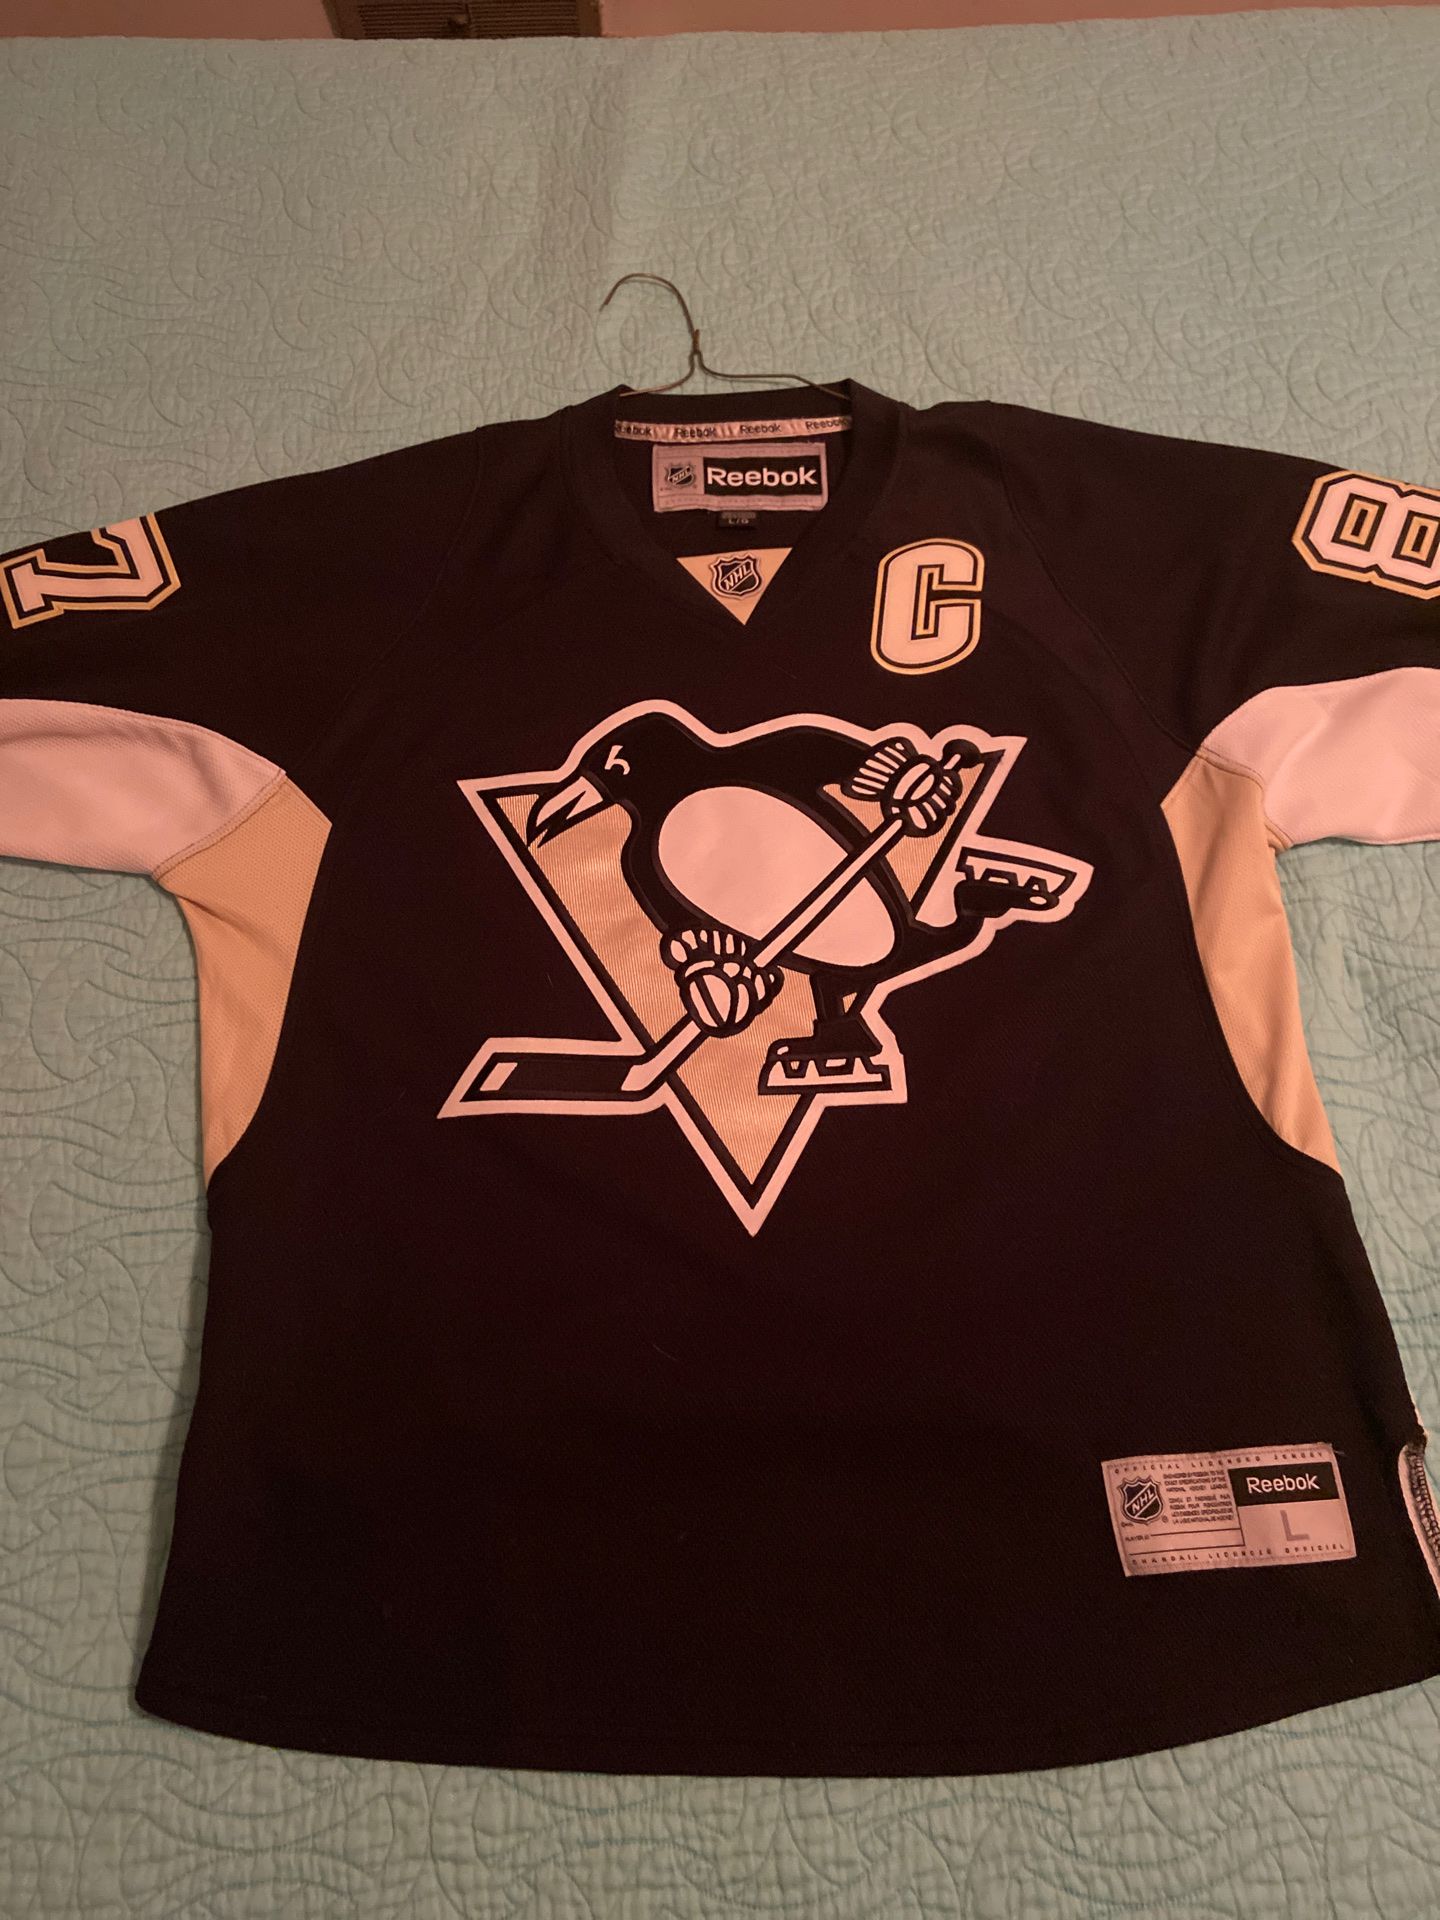 Large Sidney Crosby Jersey Authentic Reebok